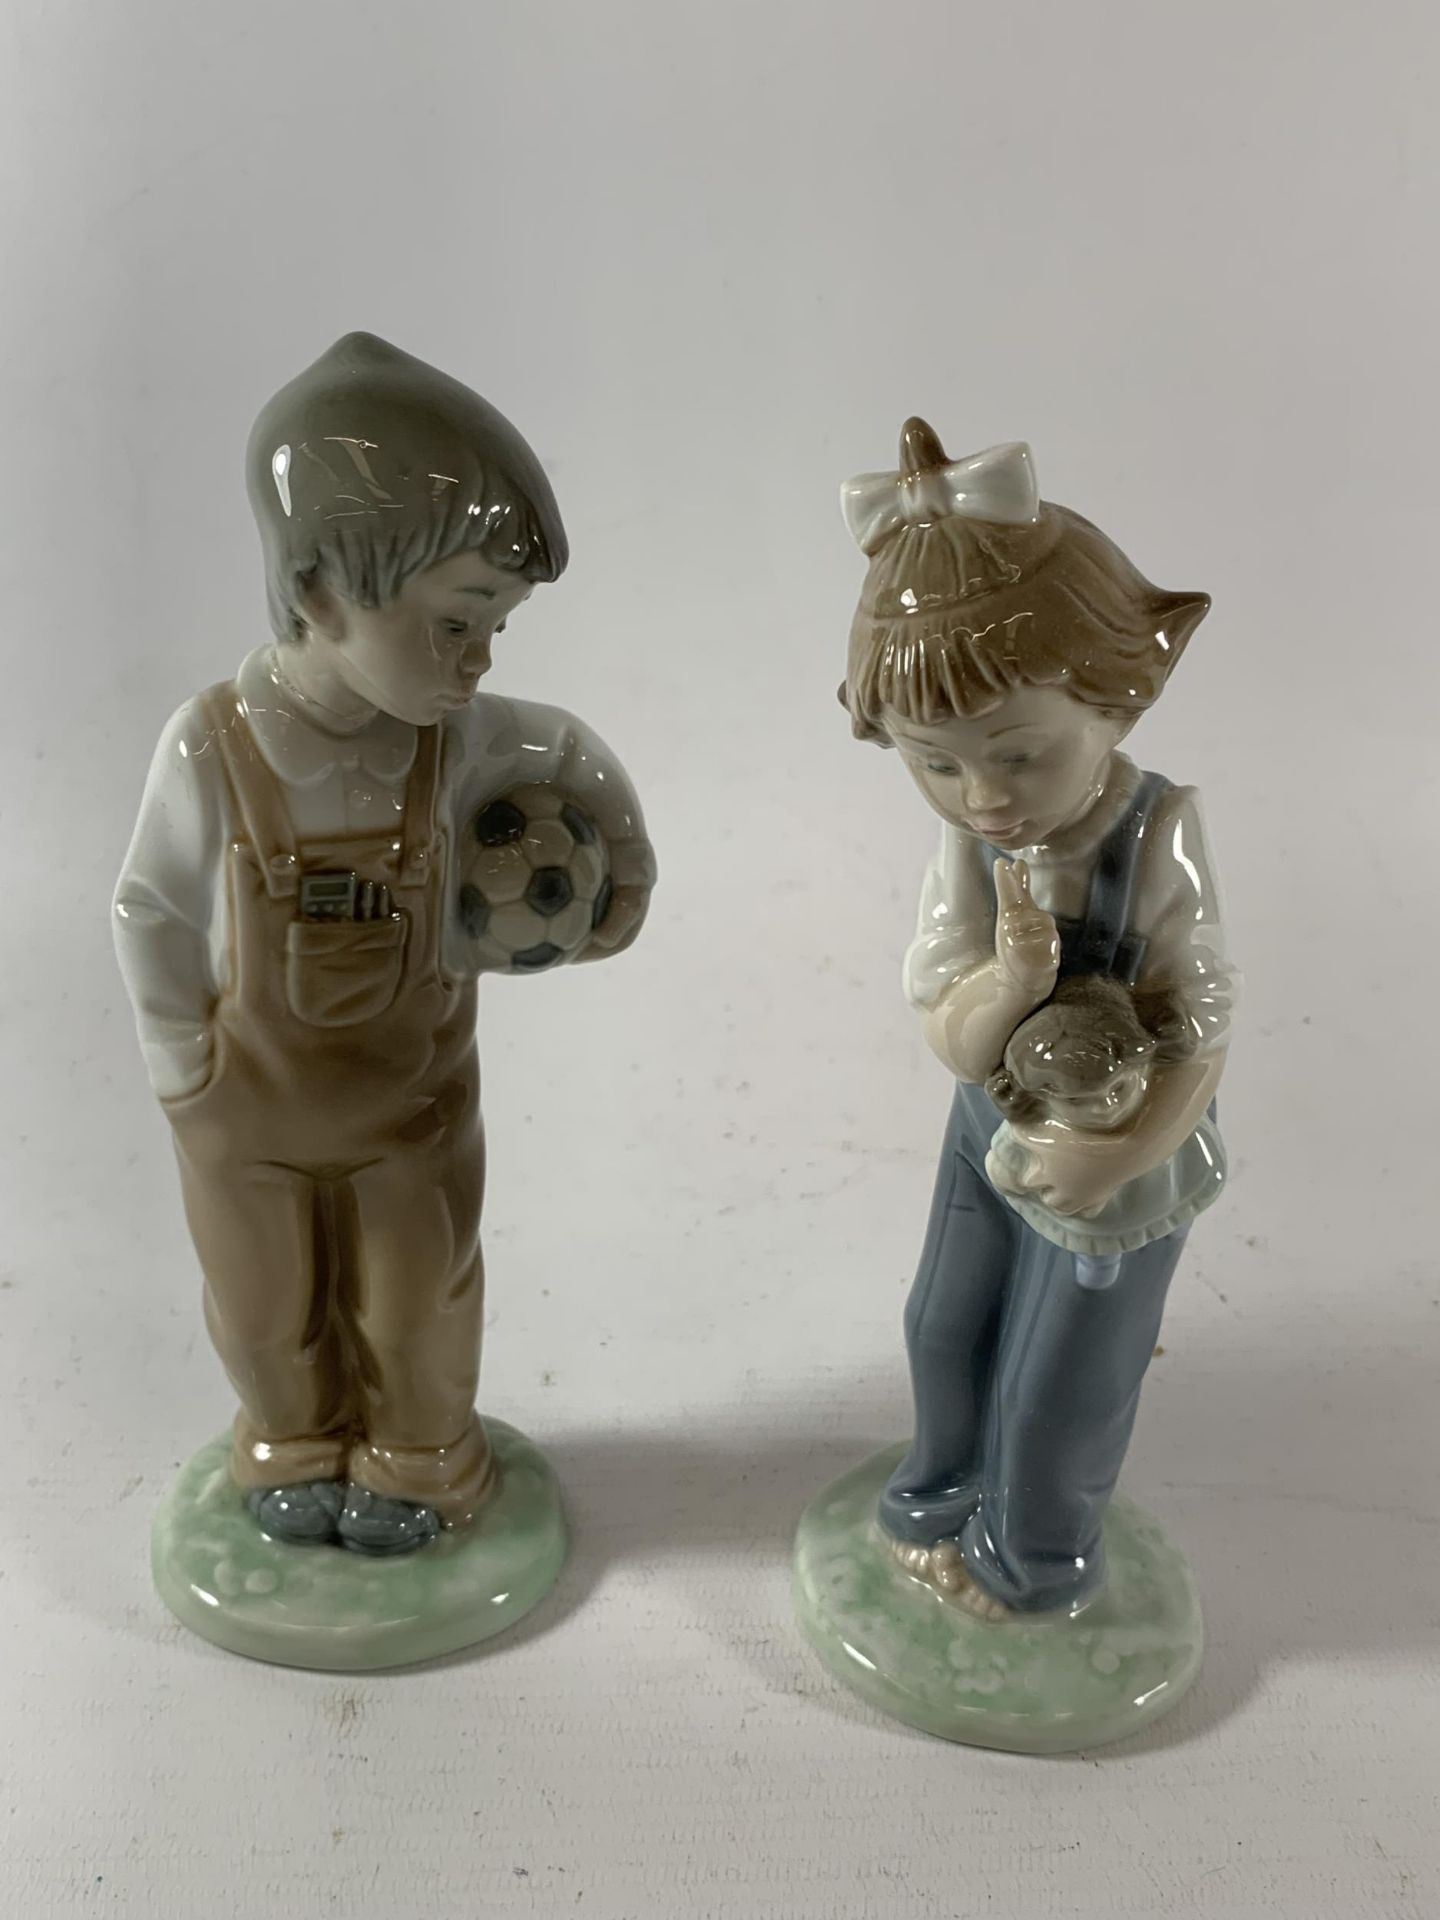 TWO NAO BOY & GIRL FIGURES - ONE WITH A FOOTBALL